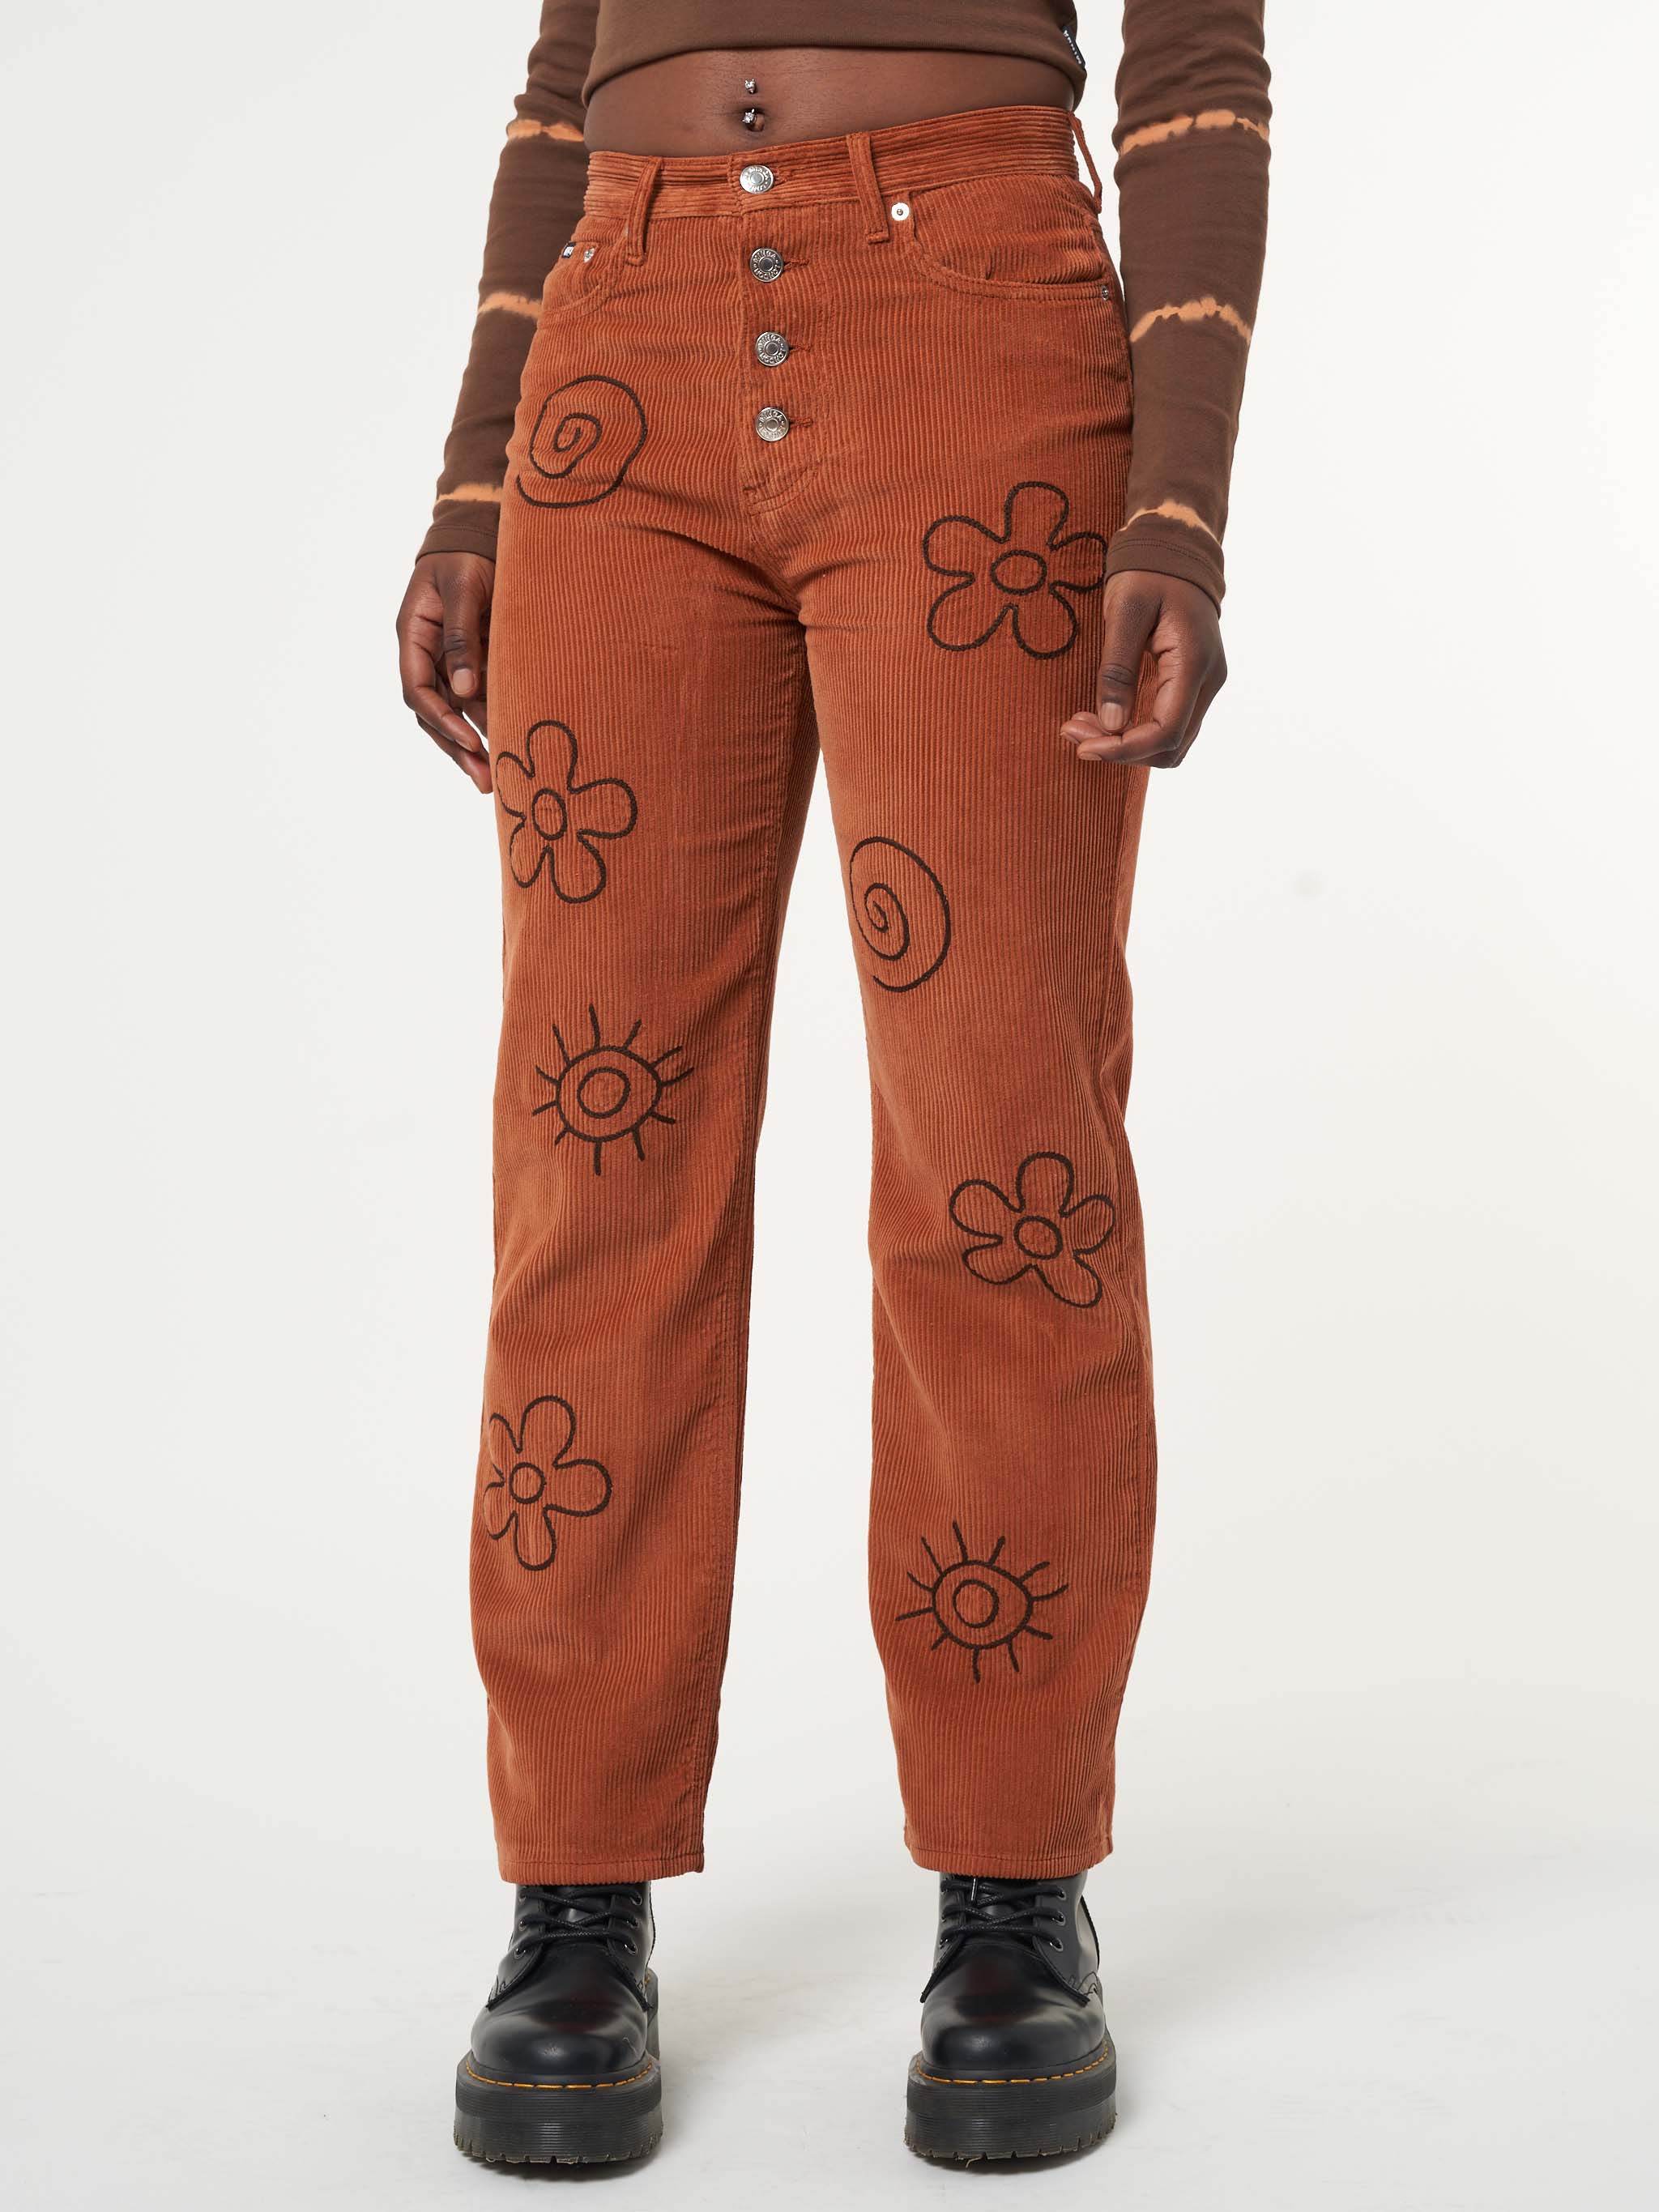 Corduroy pants in rust with front flowers, sun and spirals embroideries 